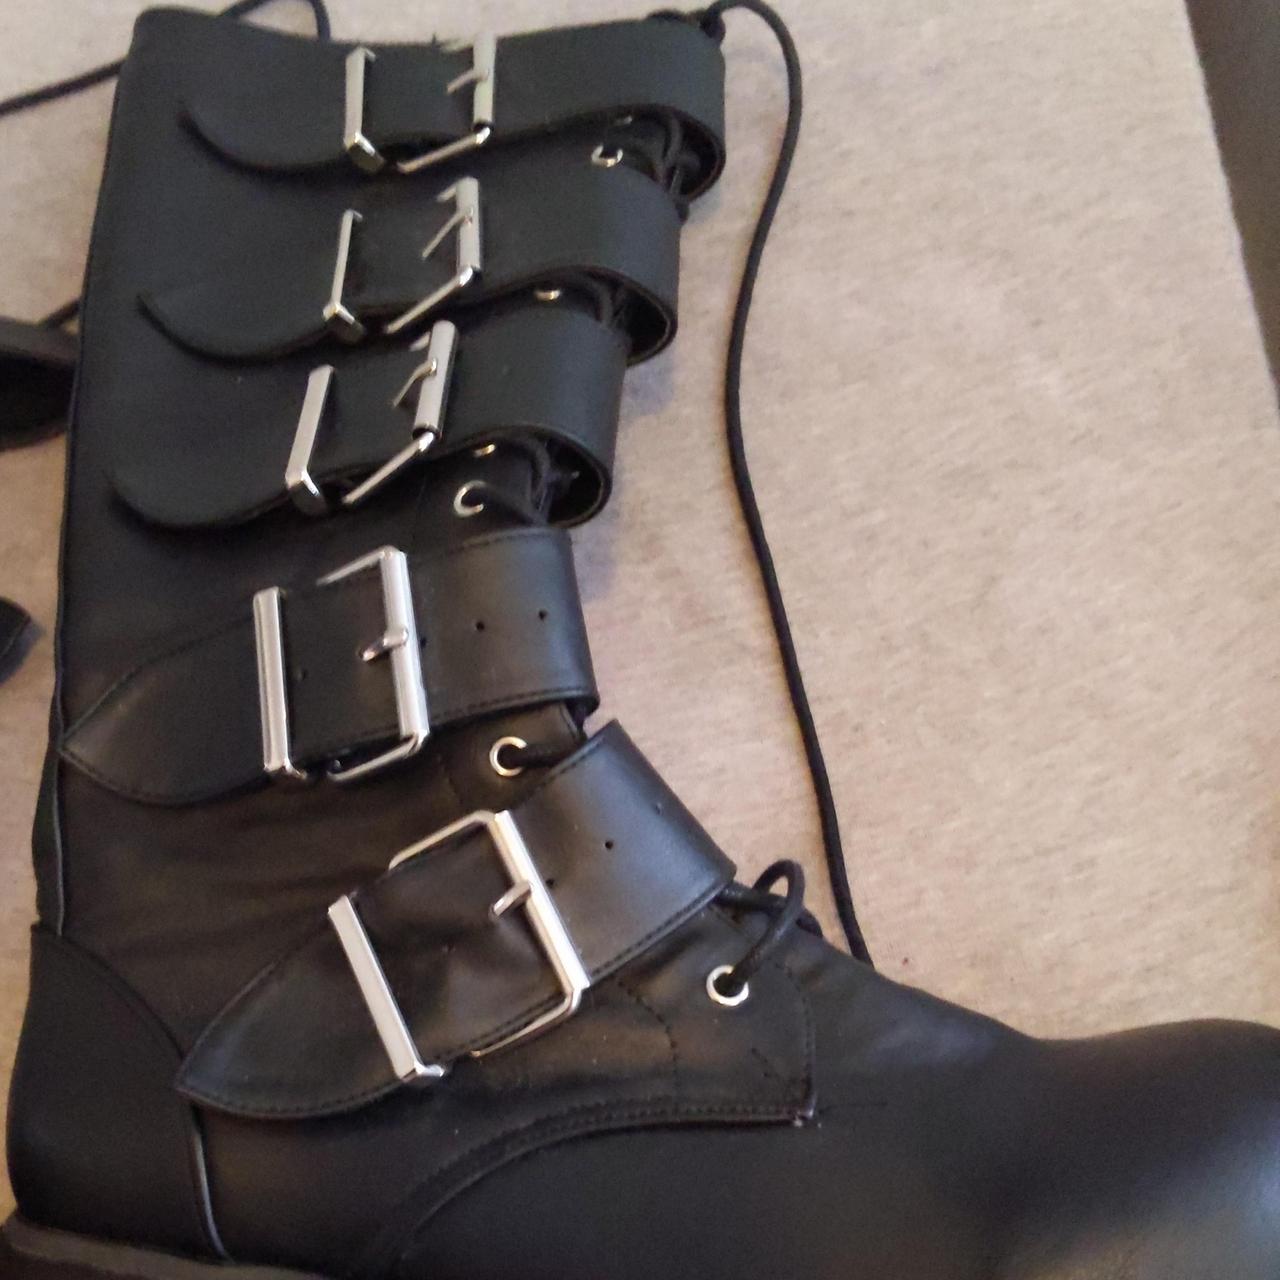 Demonia Men's Black and Silver Boots